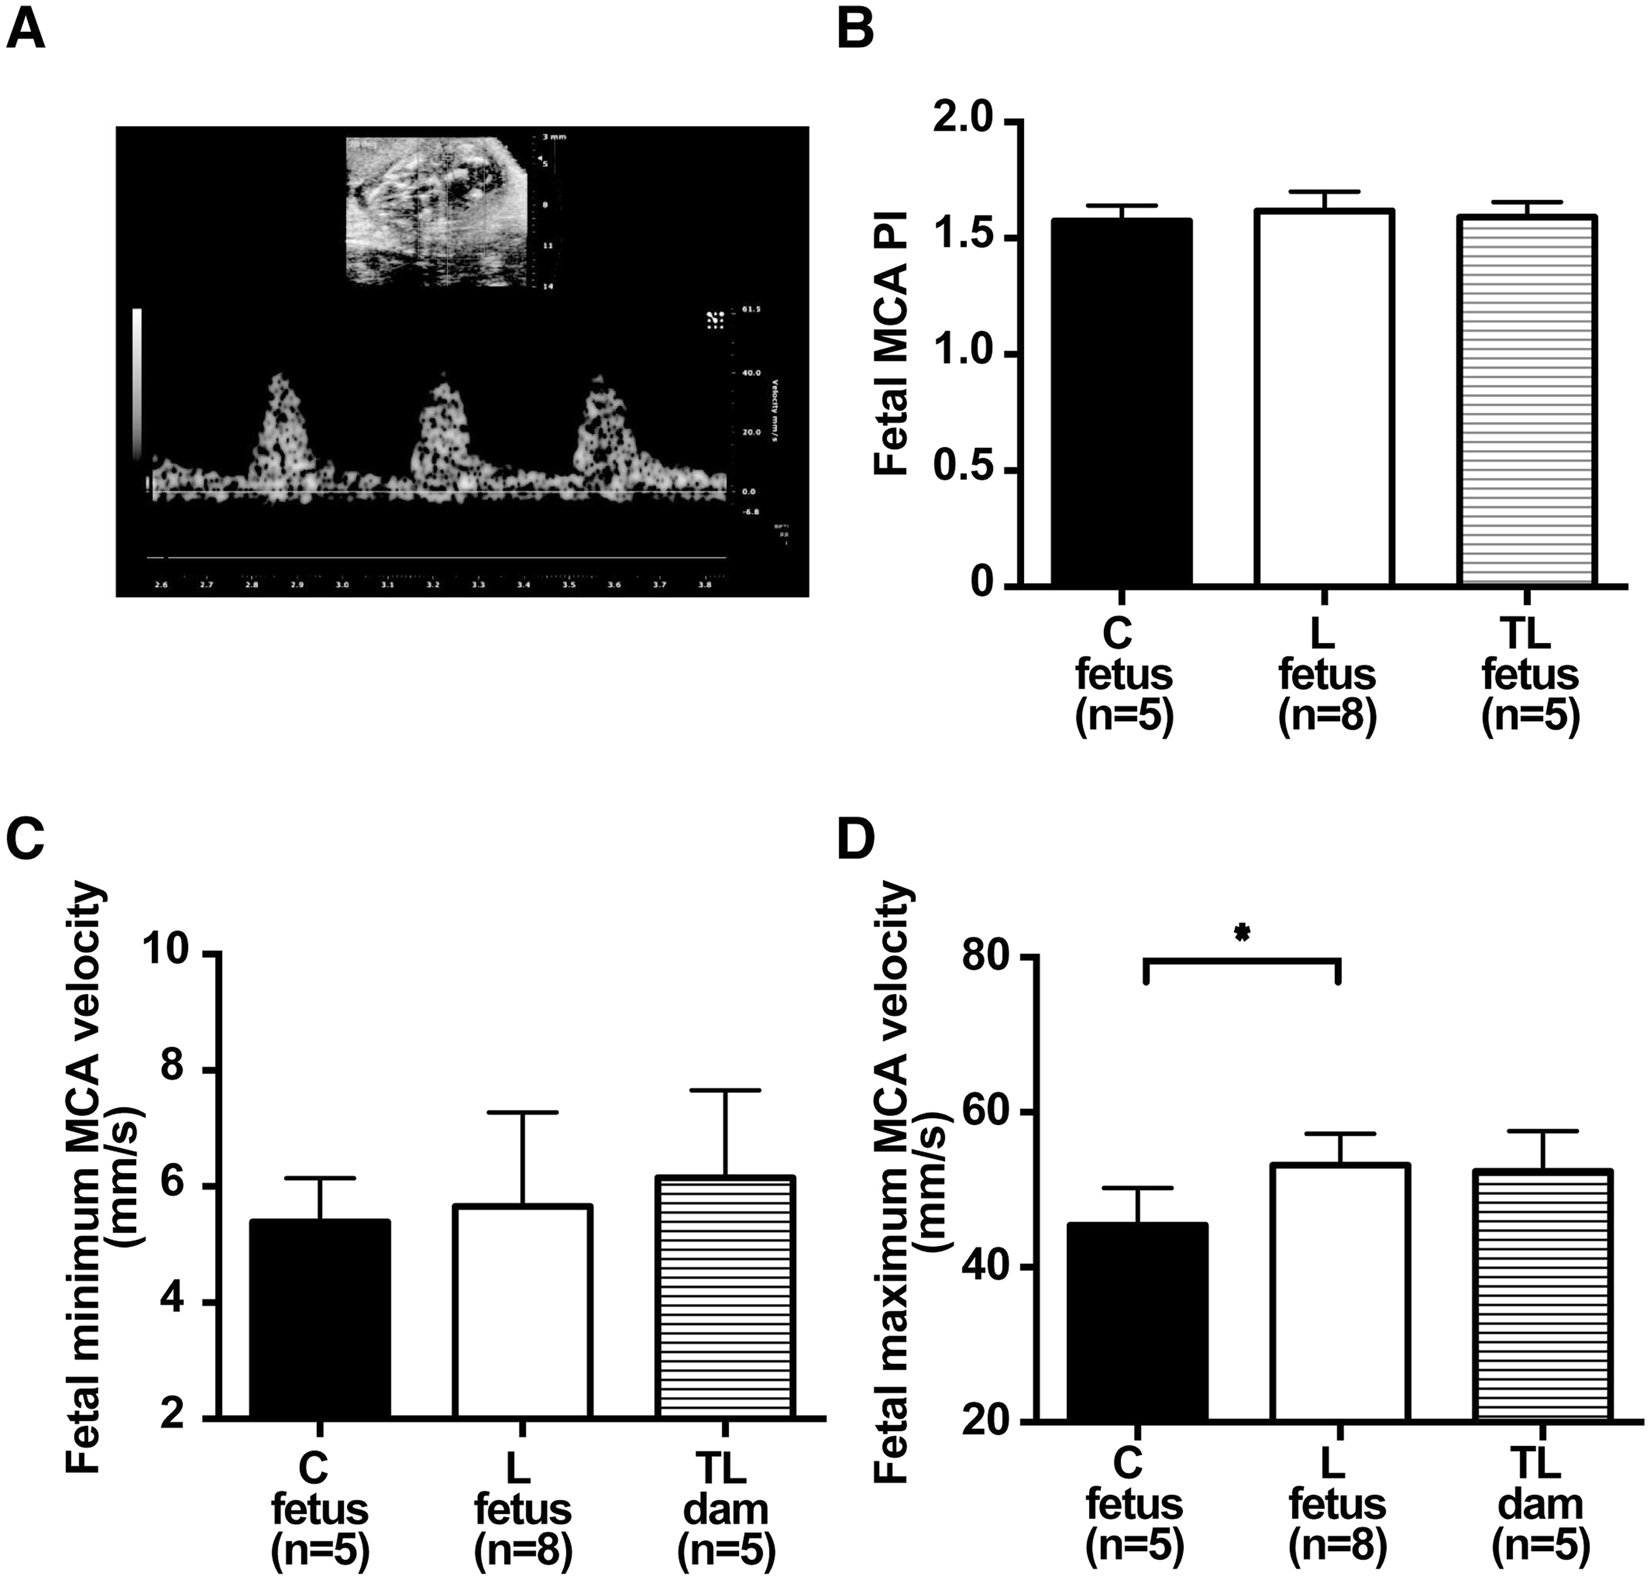 Tadalafil treatment in mice for preeclampsia with fetal growth restriction  has neuro-benefic effects in offspring through modulating prenatal hypoxic  conditions | Scientific Reports